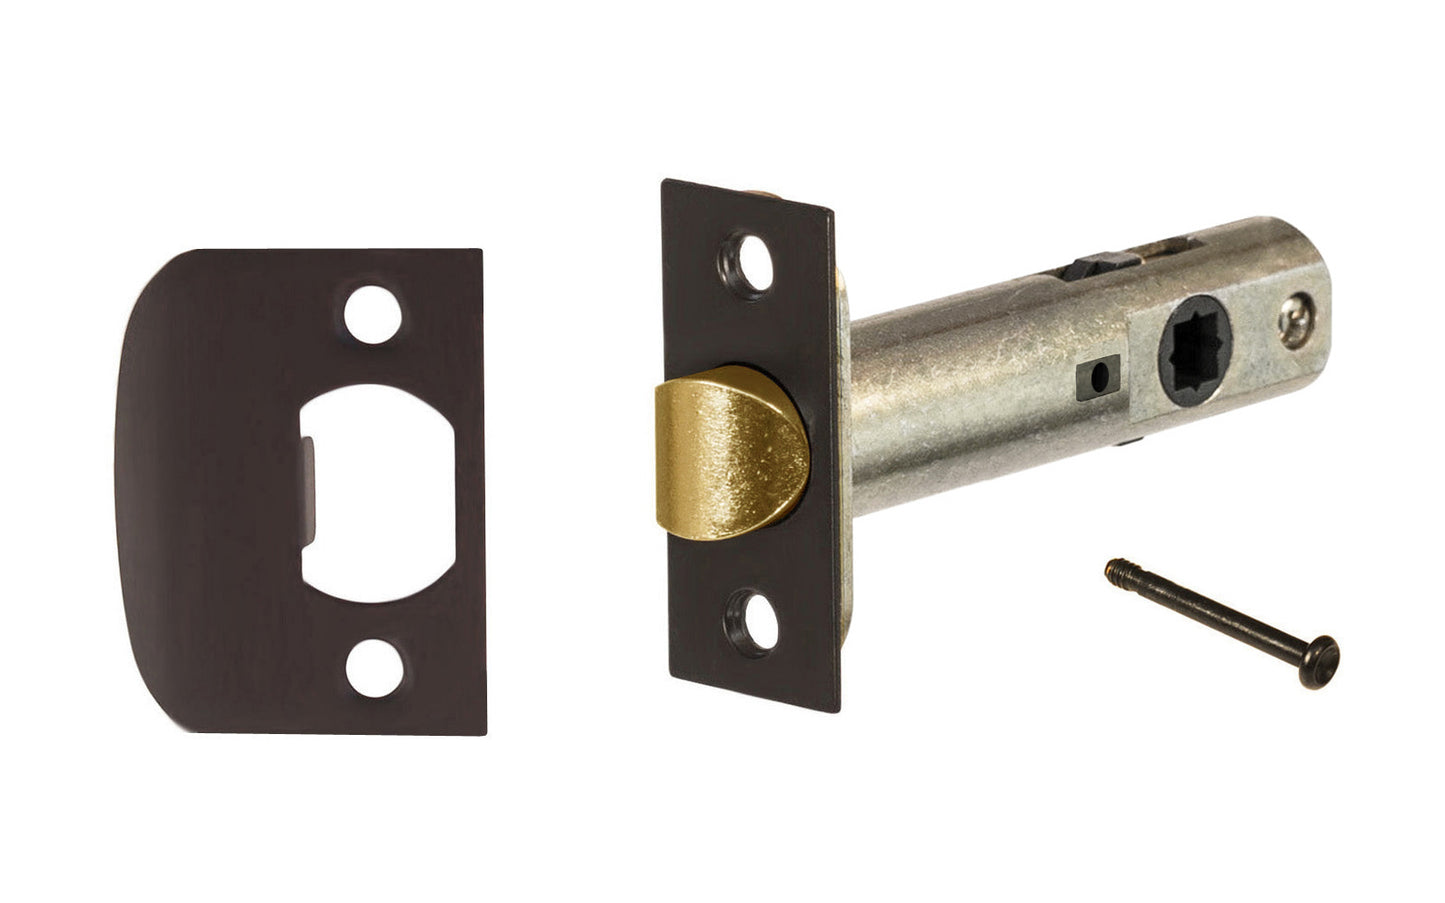 Classic Spring Latch for Doors (Privacy) with 2-3/4" Backset. Designed for traditional doorknobs with square spindle shaft. Steel casing & solid brass plates. For vintage antique door knobs, or reproduction door knobs. For locking doors. Oil rubbed bronze finish.